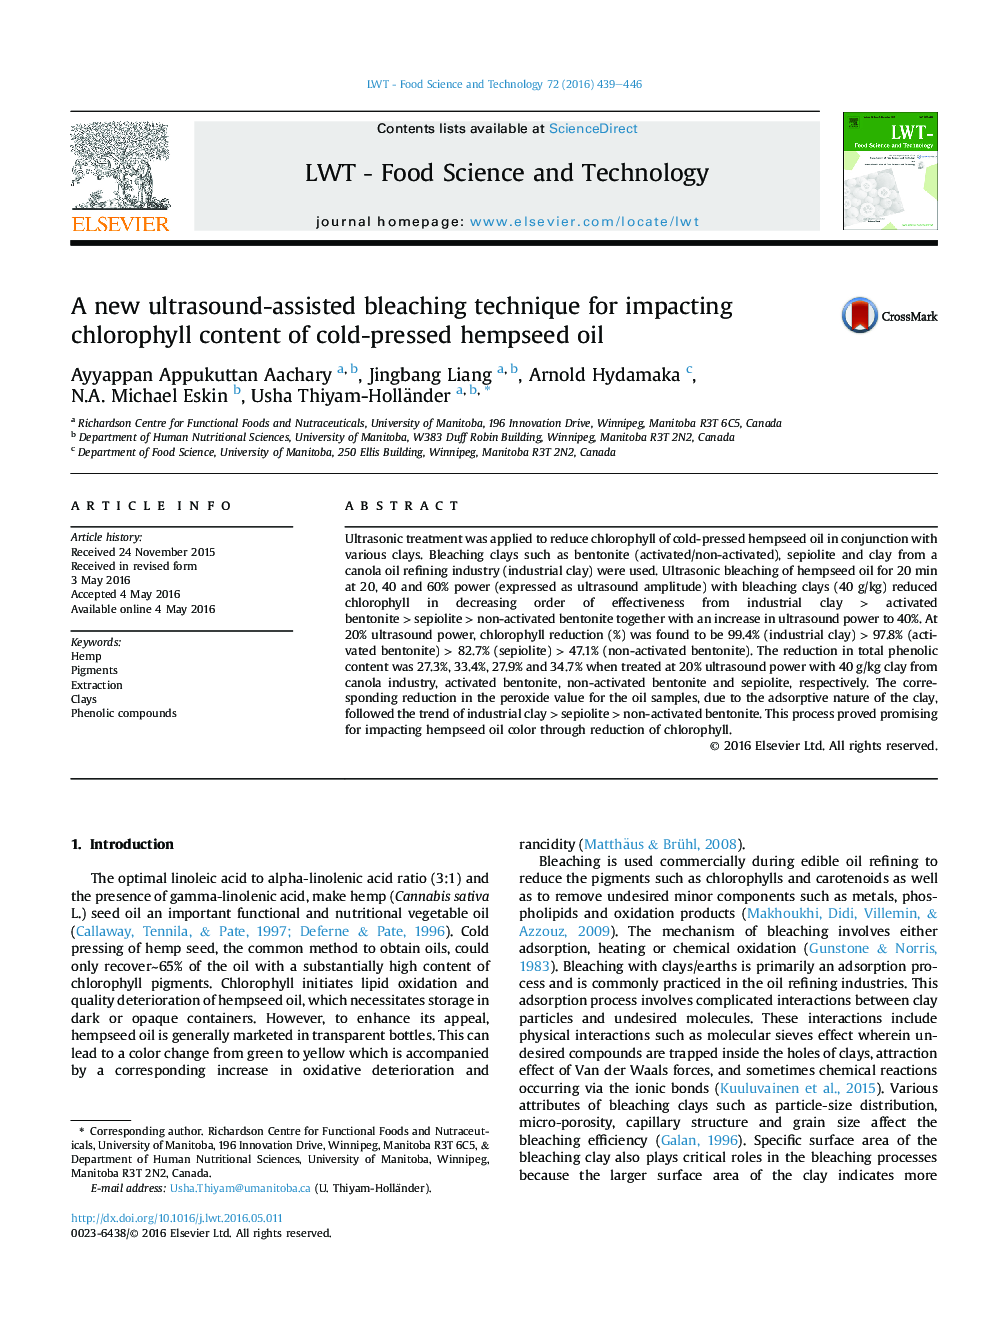 A new ultrasound-assisted bleaching technique for impacting chlorophyll content of cold-pressed hempseed oil